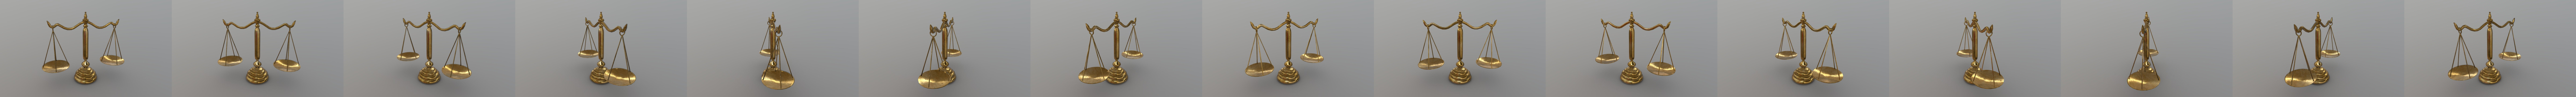 Balance Scale - 3D Model by weeray